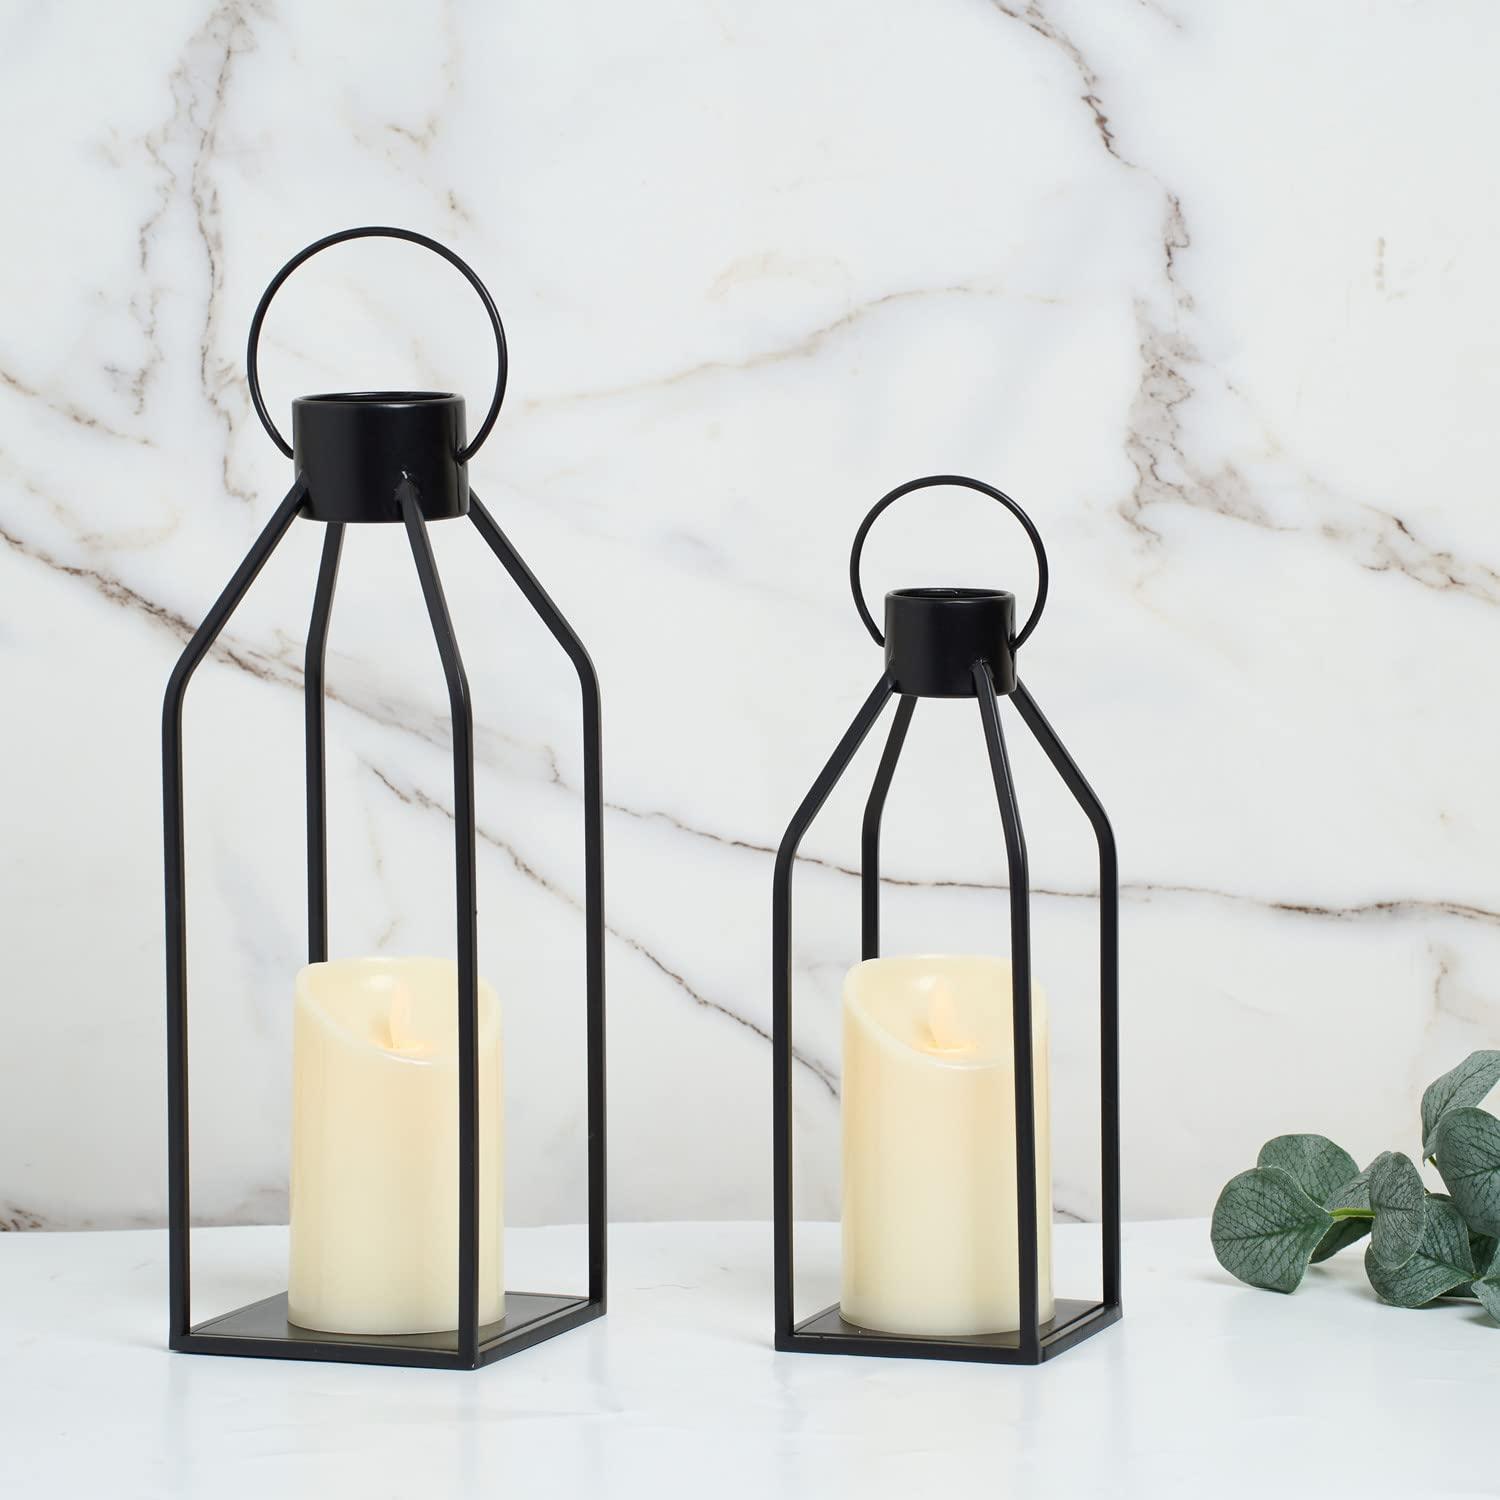 HPC Decor Modern Farmhouse Lantern Decor- Black Metal Candle Lanterns for Christmas- Lanterns Decorative w/Timer Flickering Candles for Living Room,Home,Indoor, Outdoor,Table,Fireplace Mantle Decor - CookCave